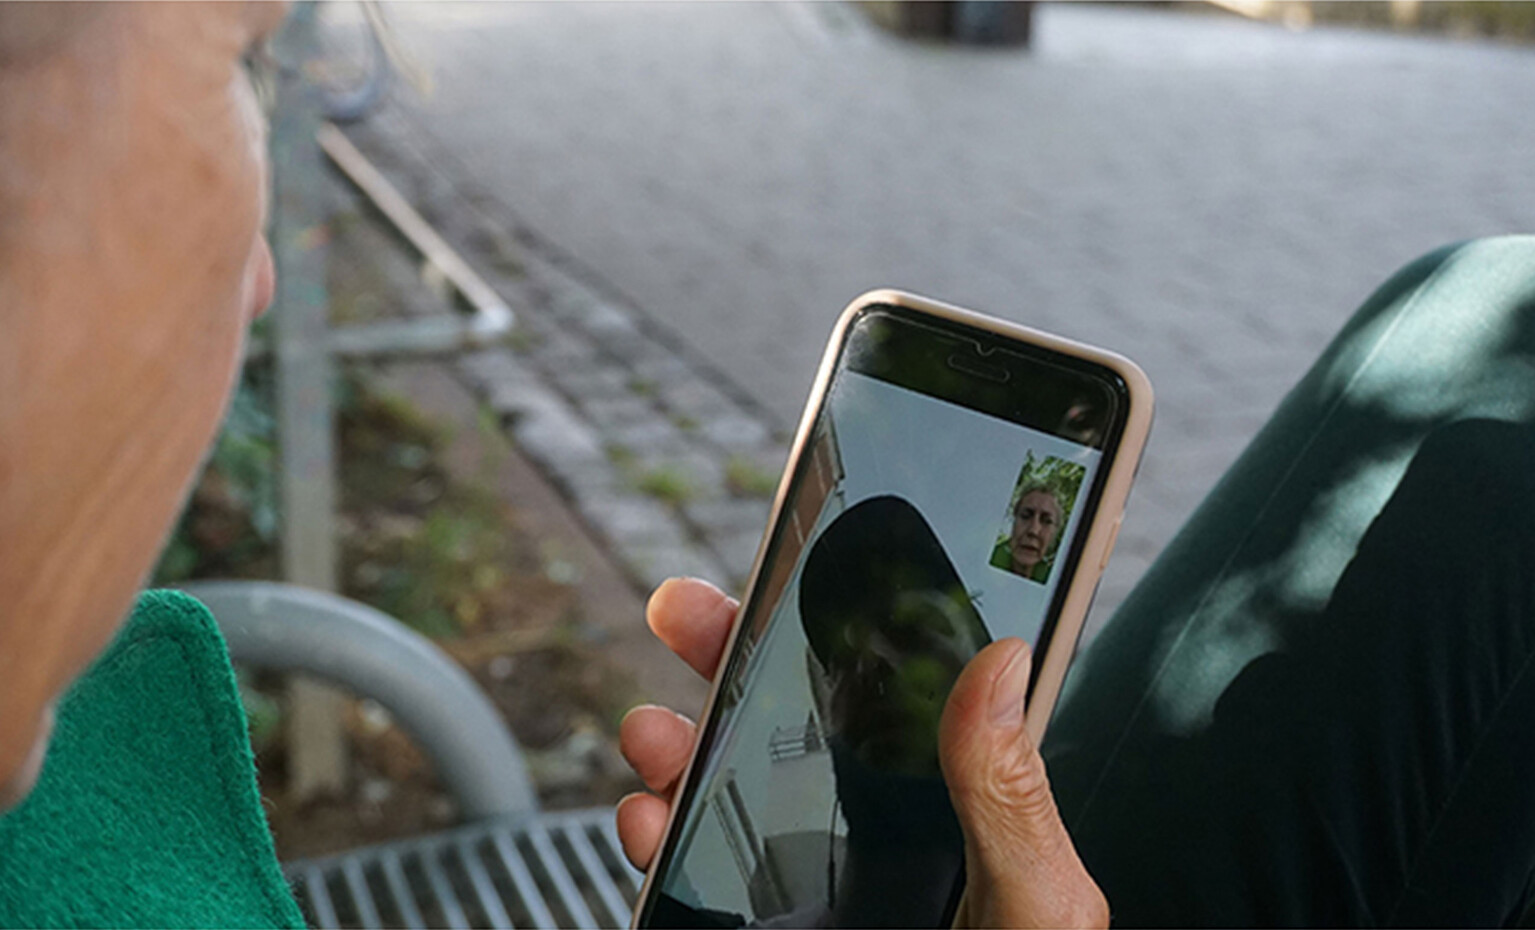 Elderly woman sitting on a bench in what seems to be a park with a mobile phone in her hand. She is on a videocall with a younger person..